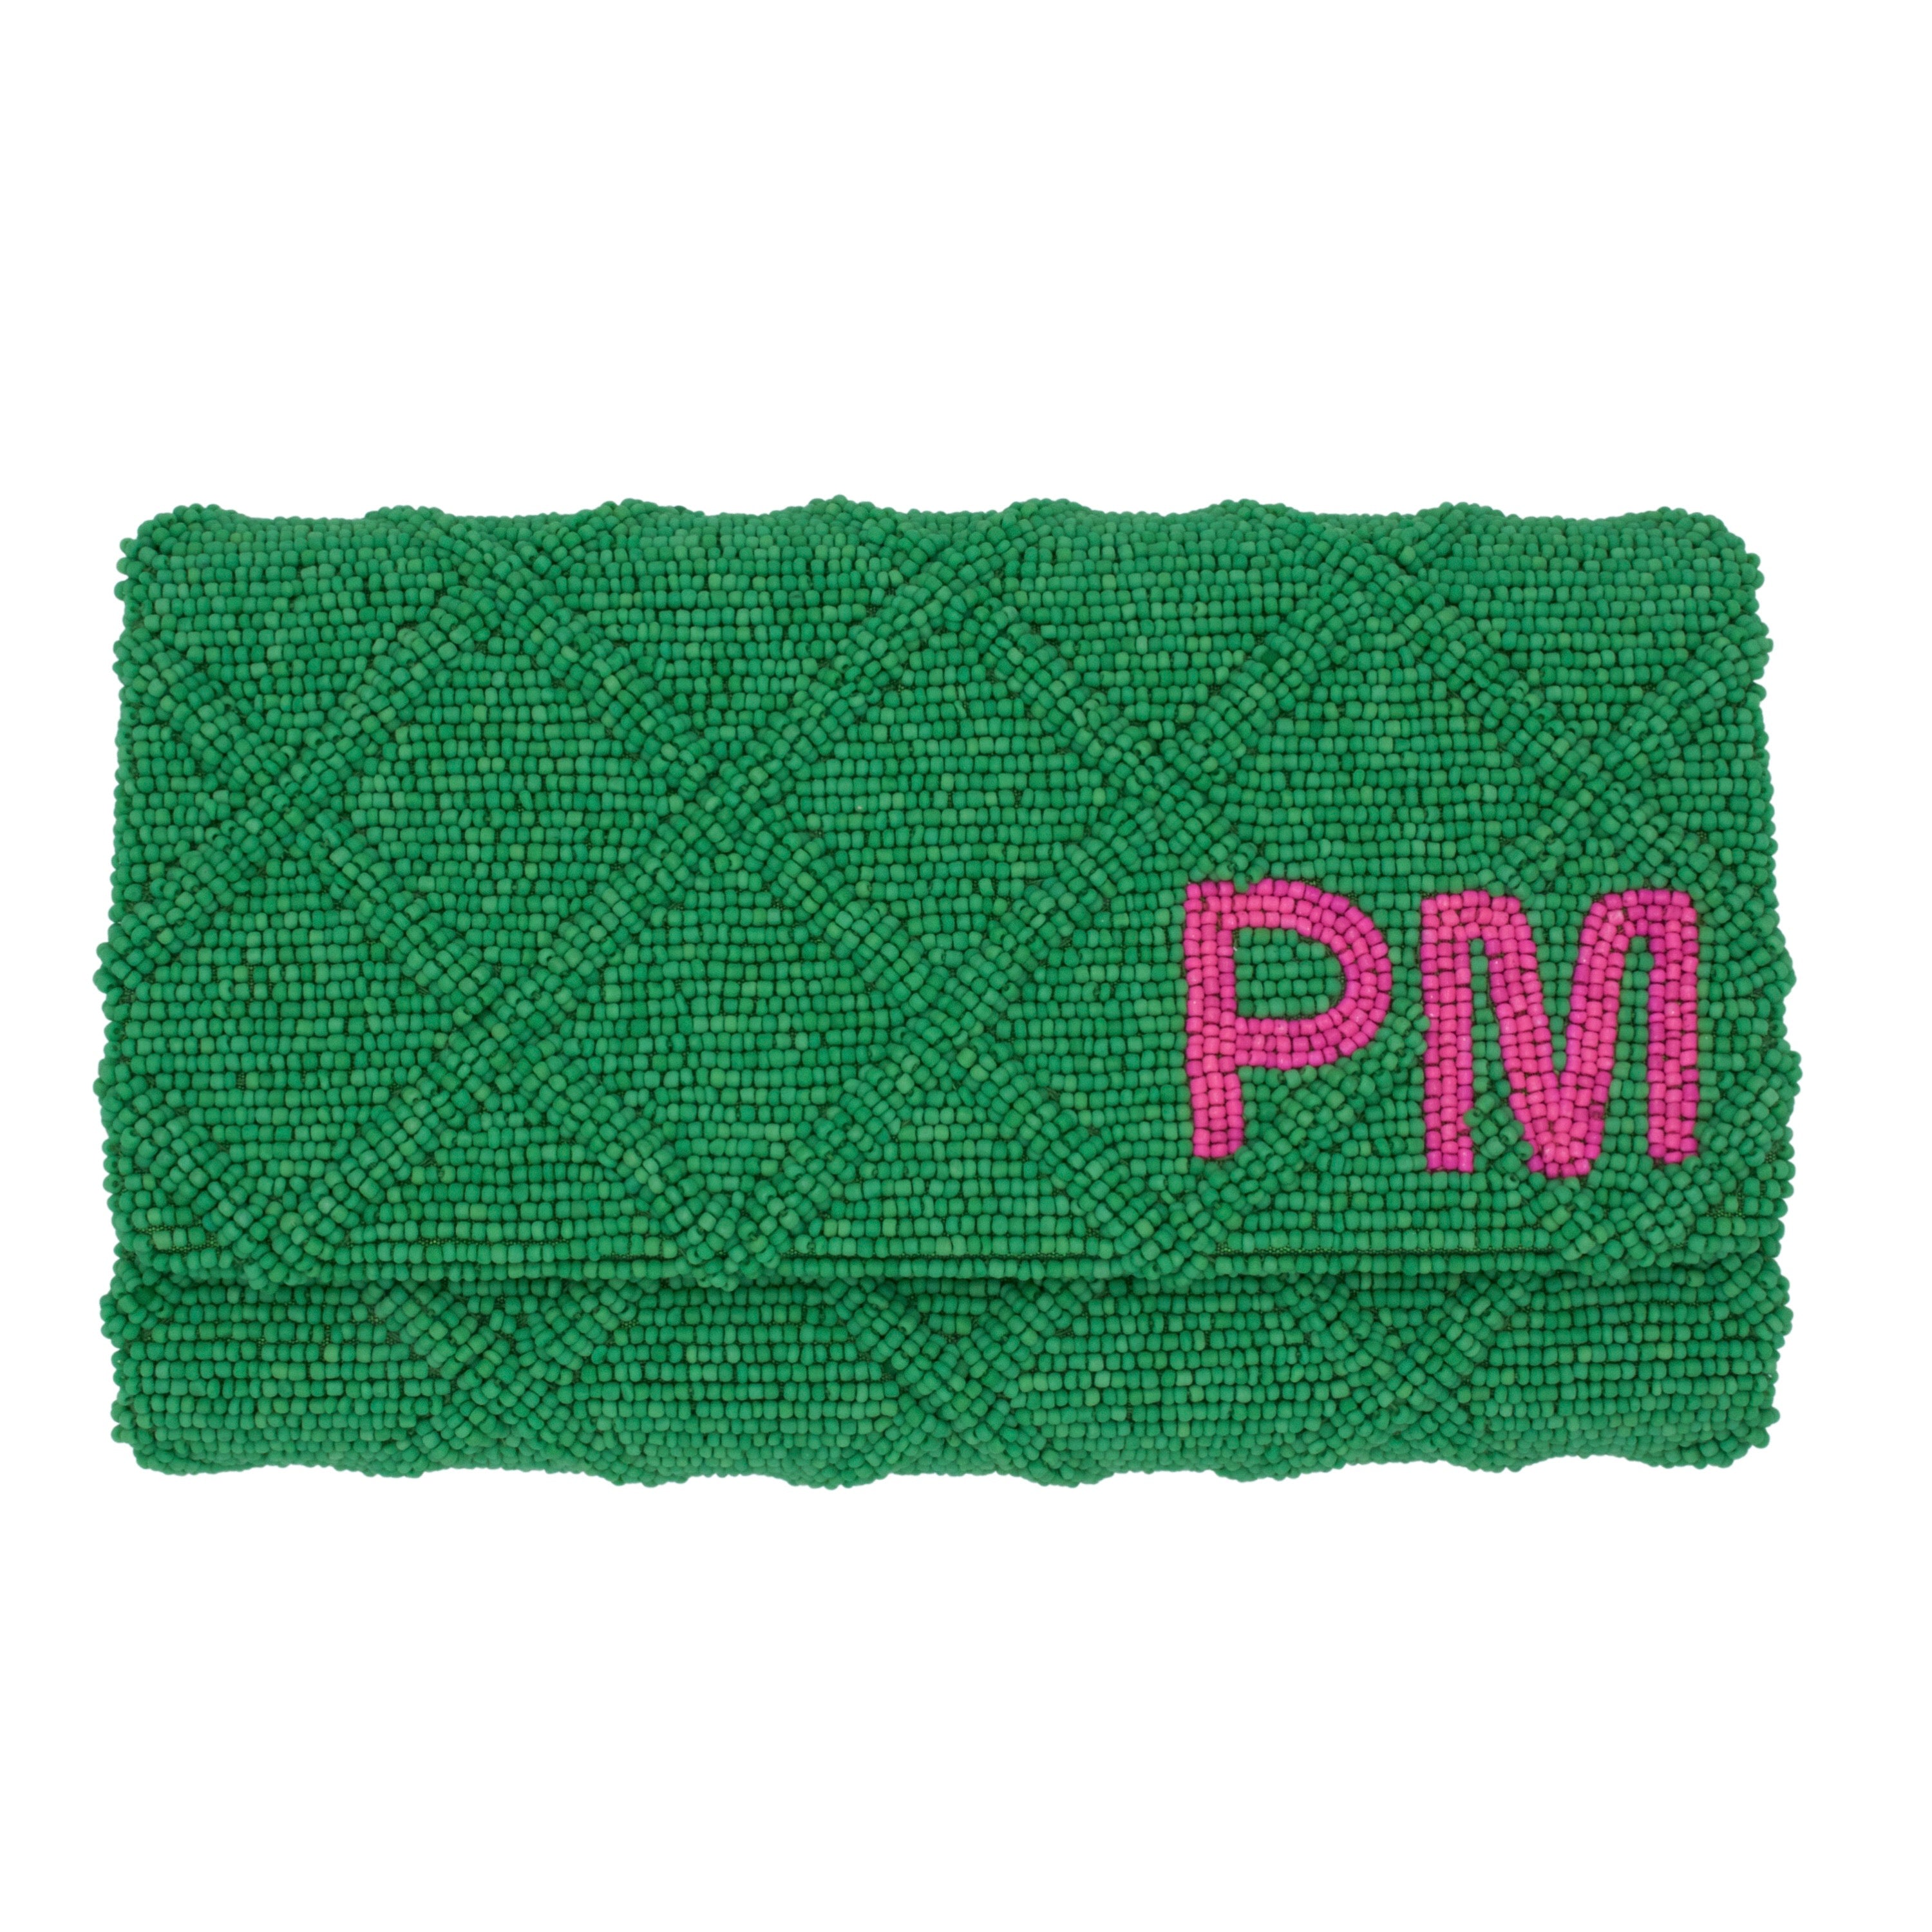 Custom Beaded Clutch - The Preppy Podcast Collab